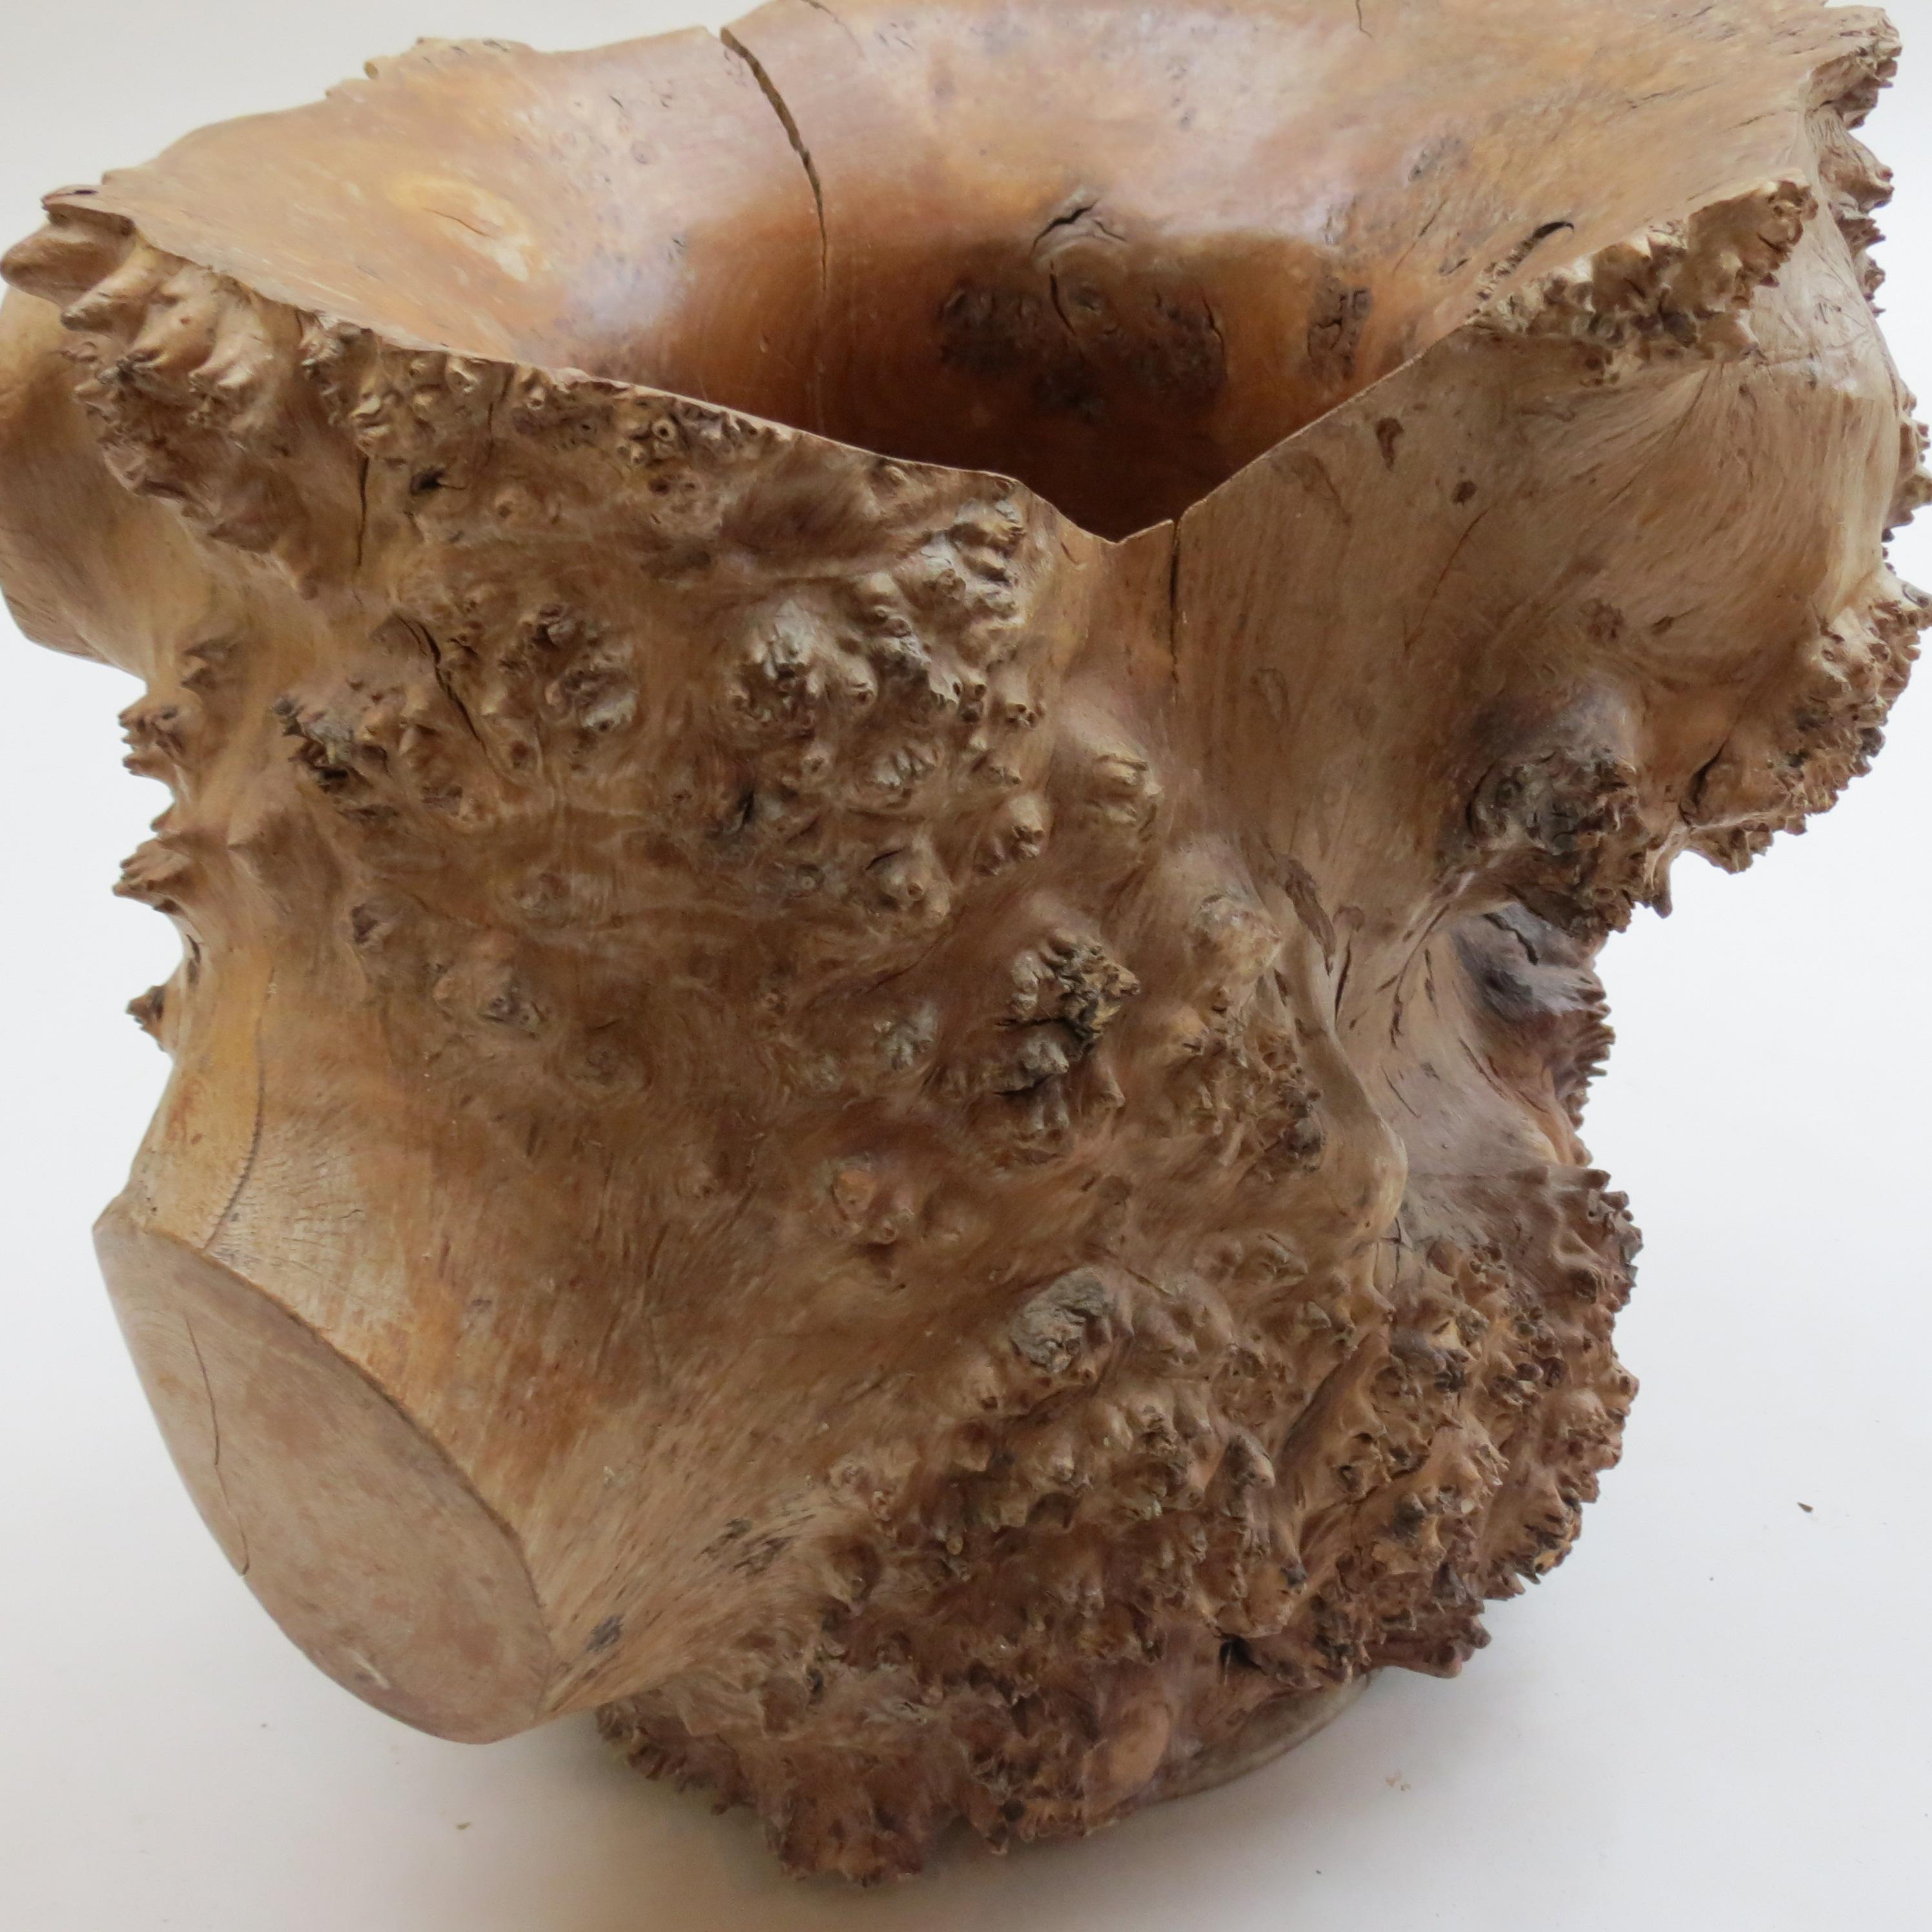 A large hand produced brush pot made from Burr Elm. A very sculptural piece with textured exterior and smooth interior to the pot. This piece dates from the 1980s.

In good condition, natural drying of the wood has produced various superficial